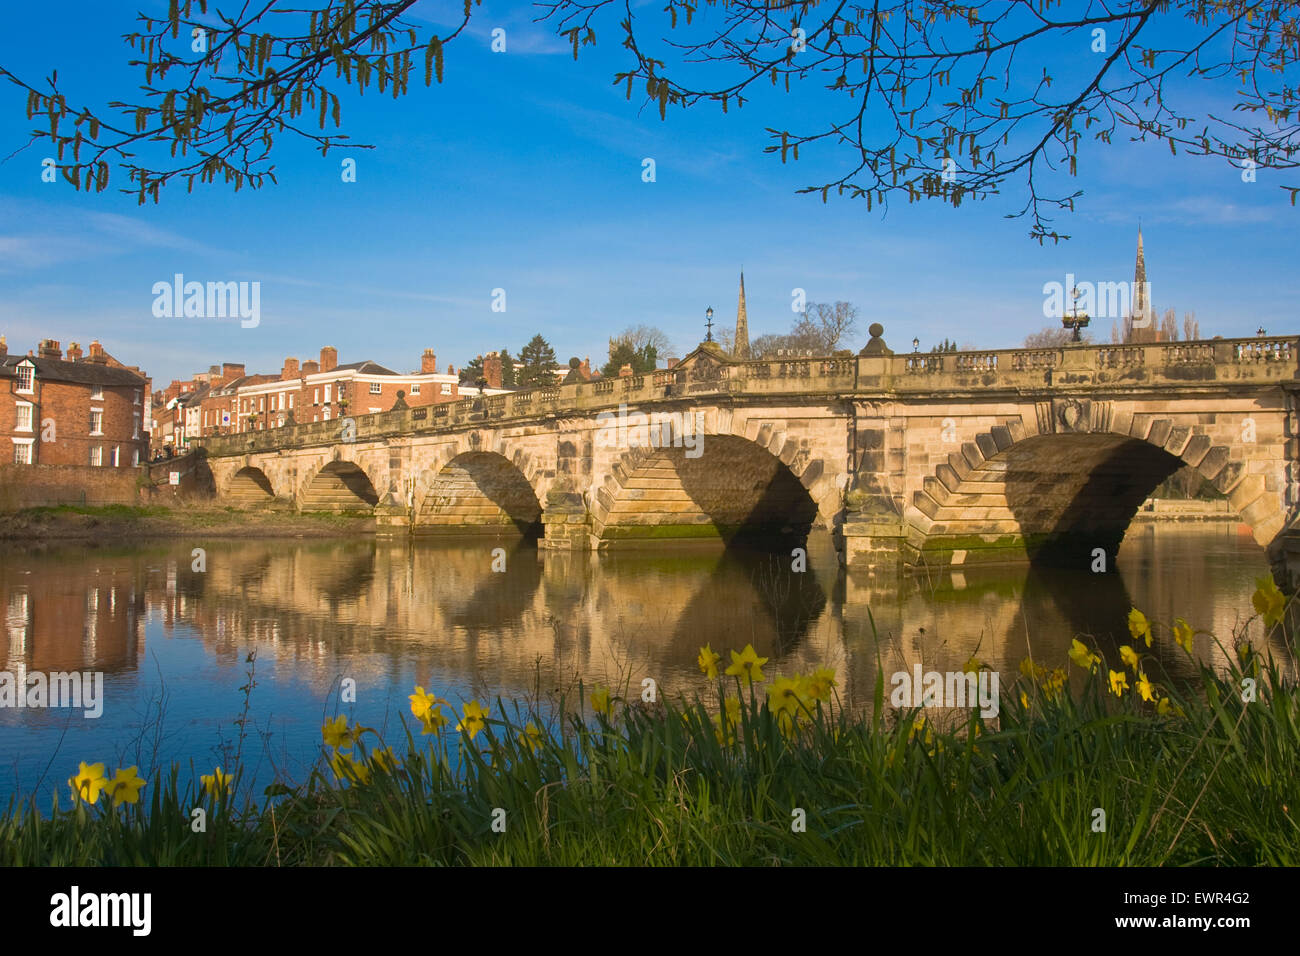 Daffodils near the River Severn and English Bridge in Shrewsbury, Shropshire, April 2015. The blue sky and sunshine adds to the beautiful spring scene. Stock Photo